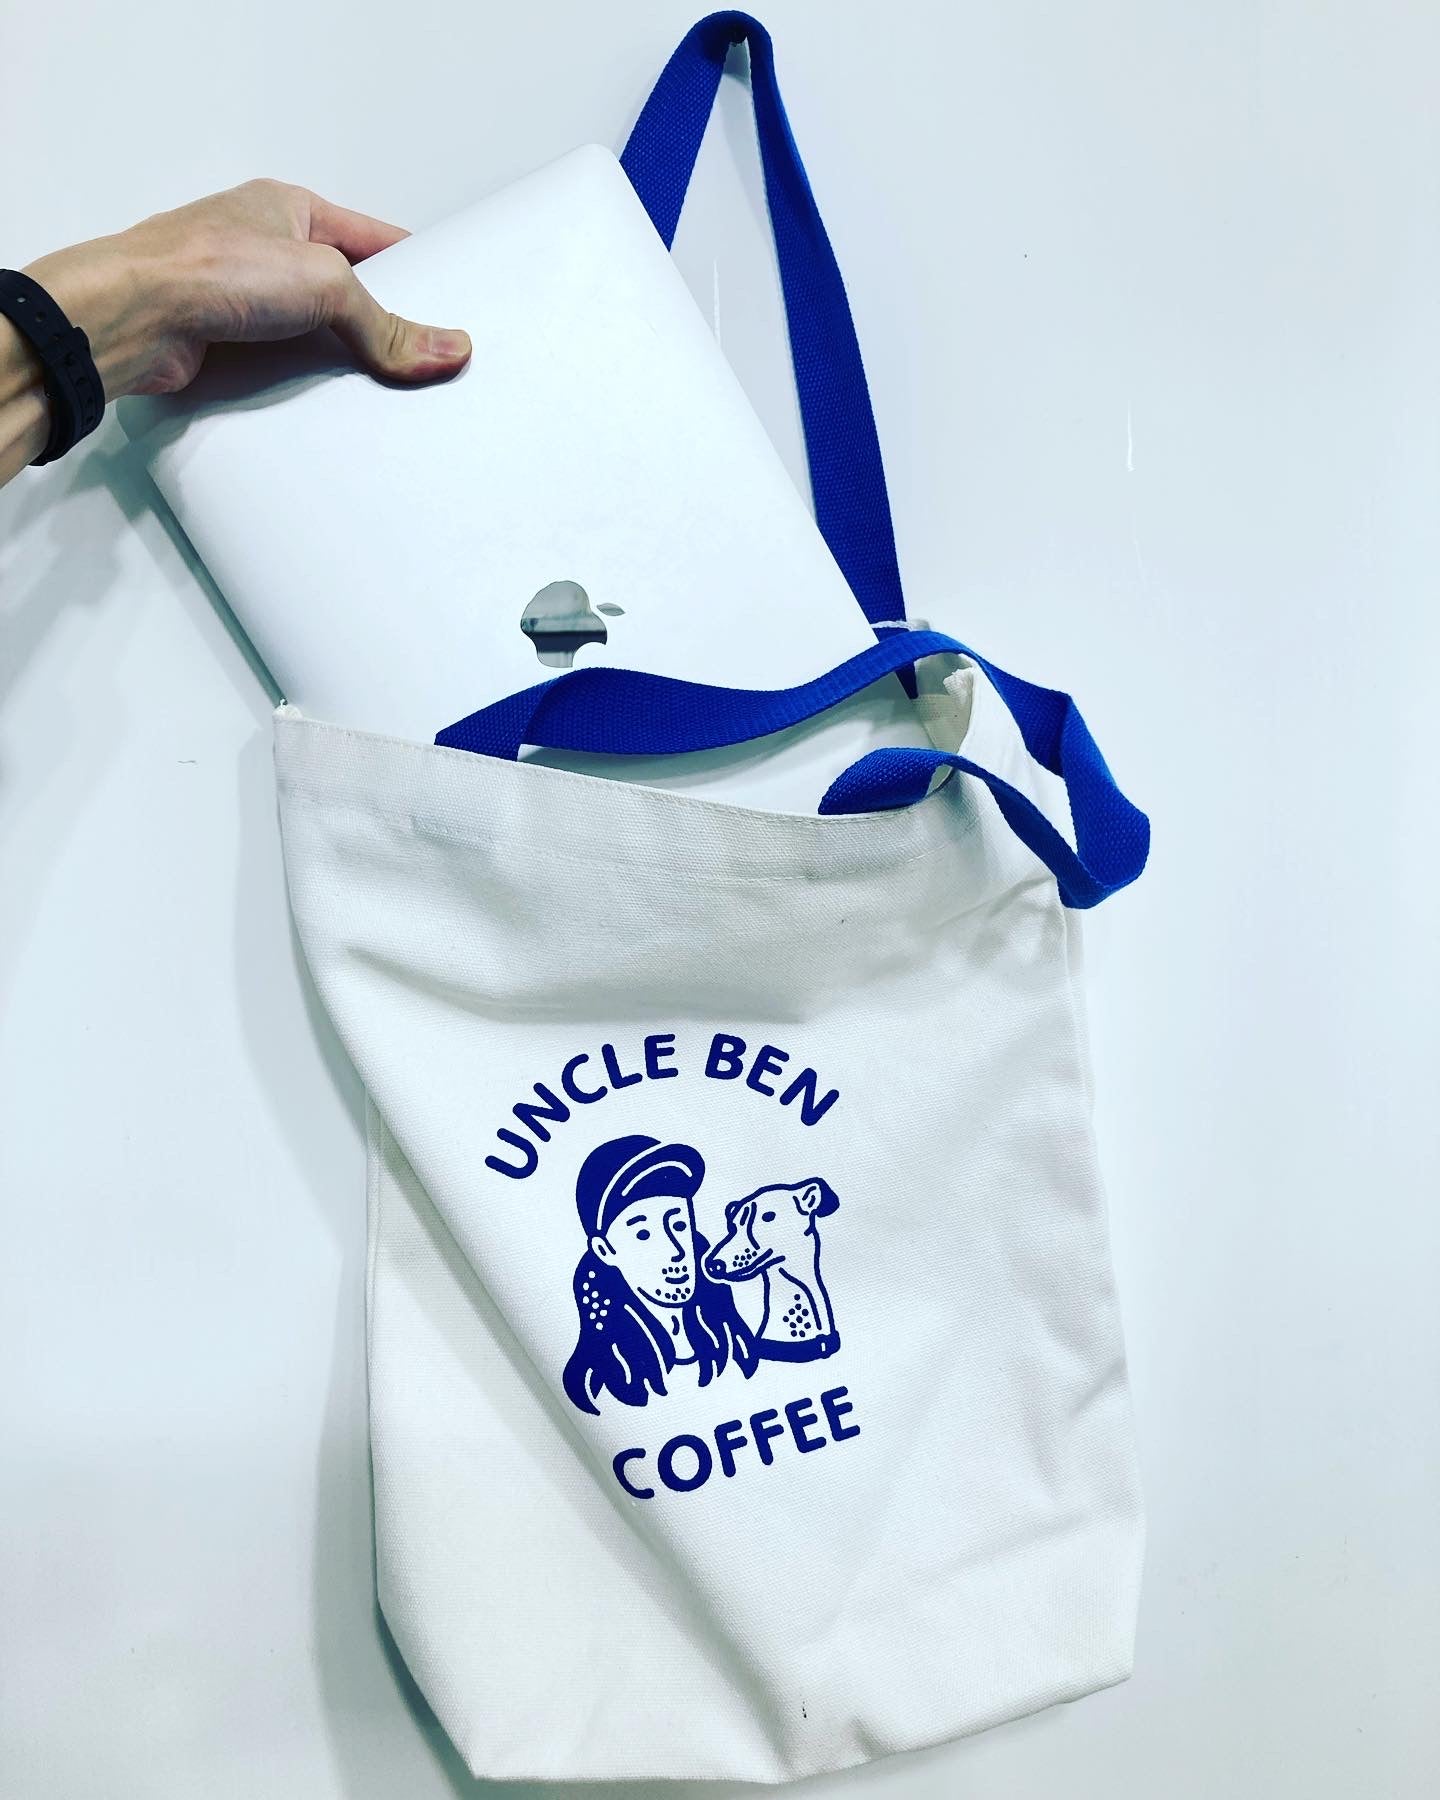 Uncle Ben Coffee Tote Bag with Mac book